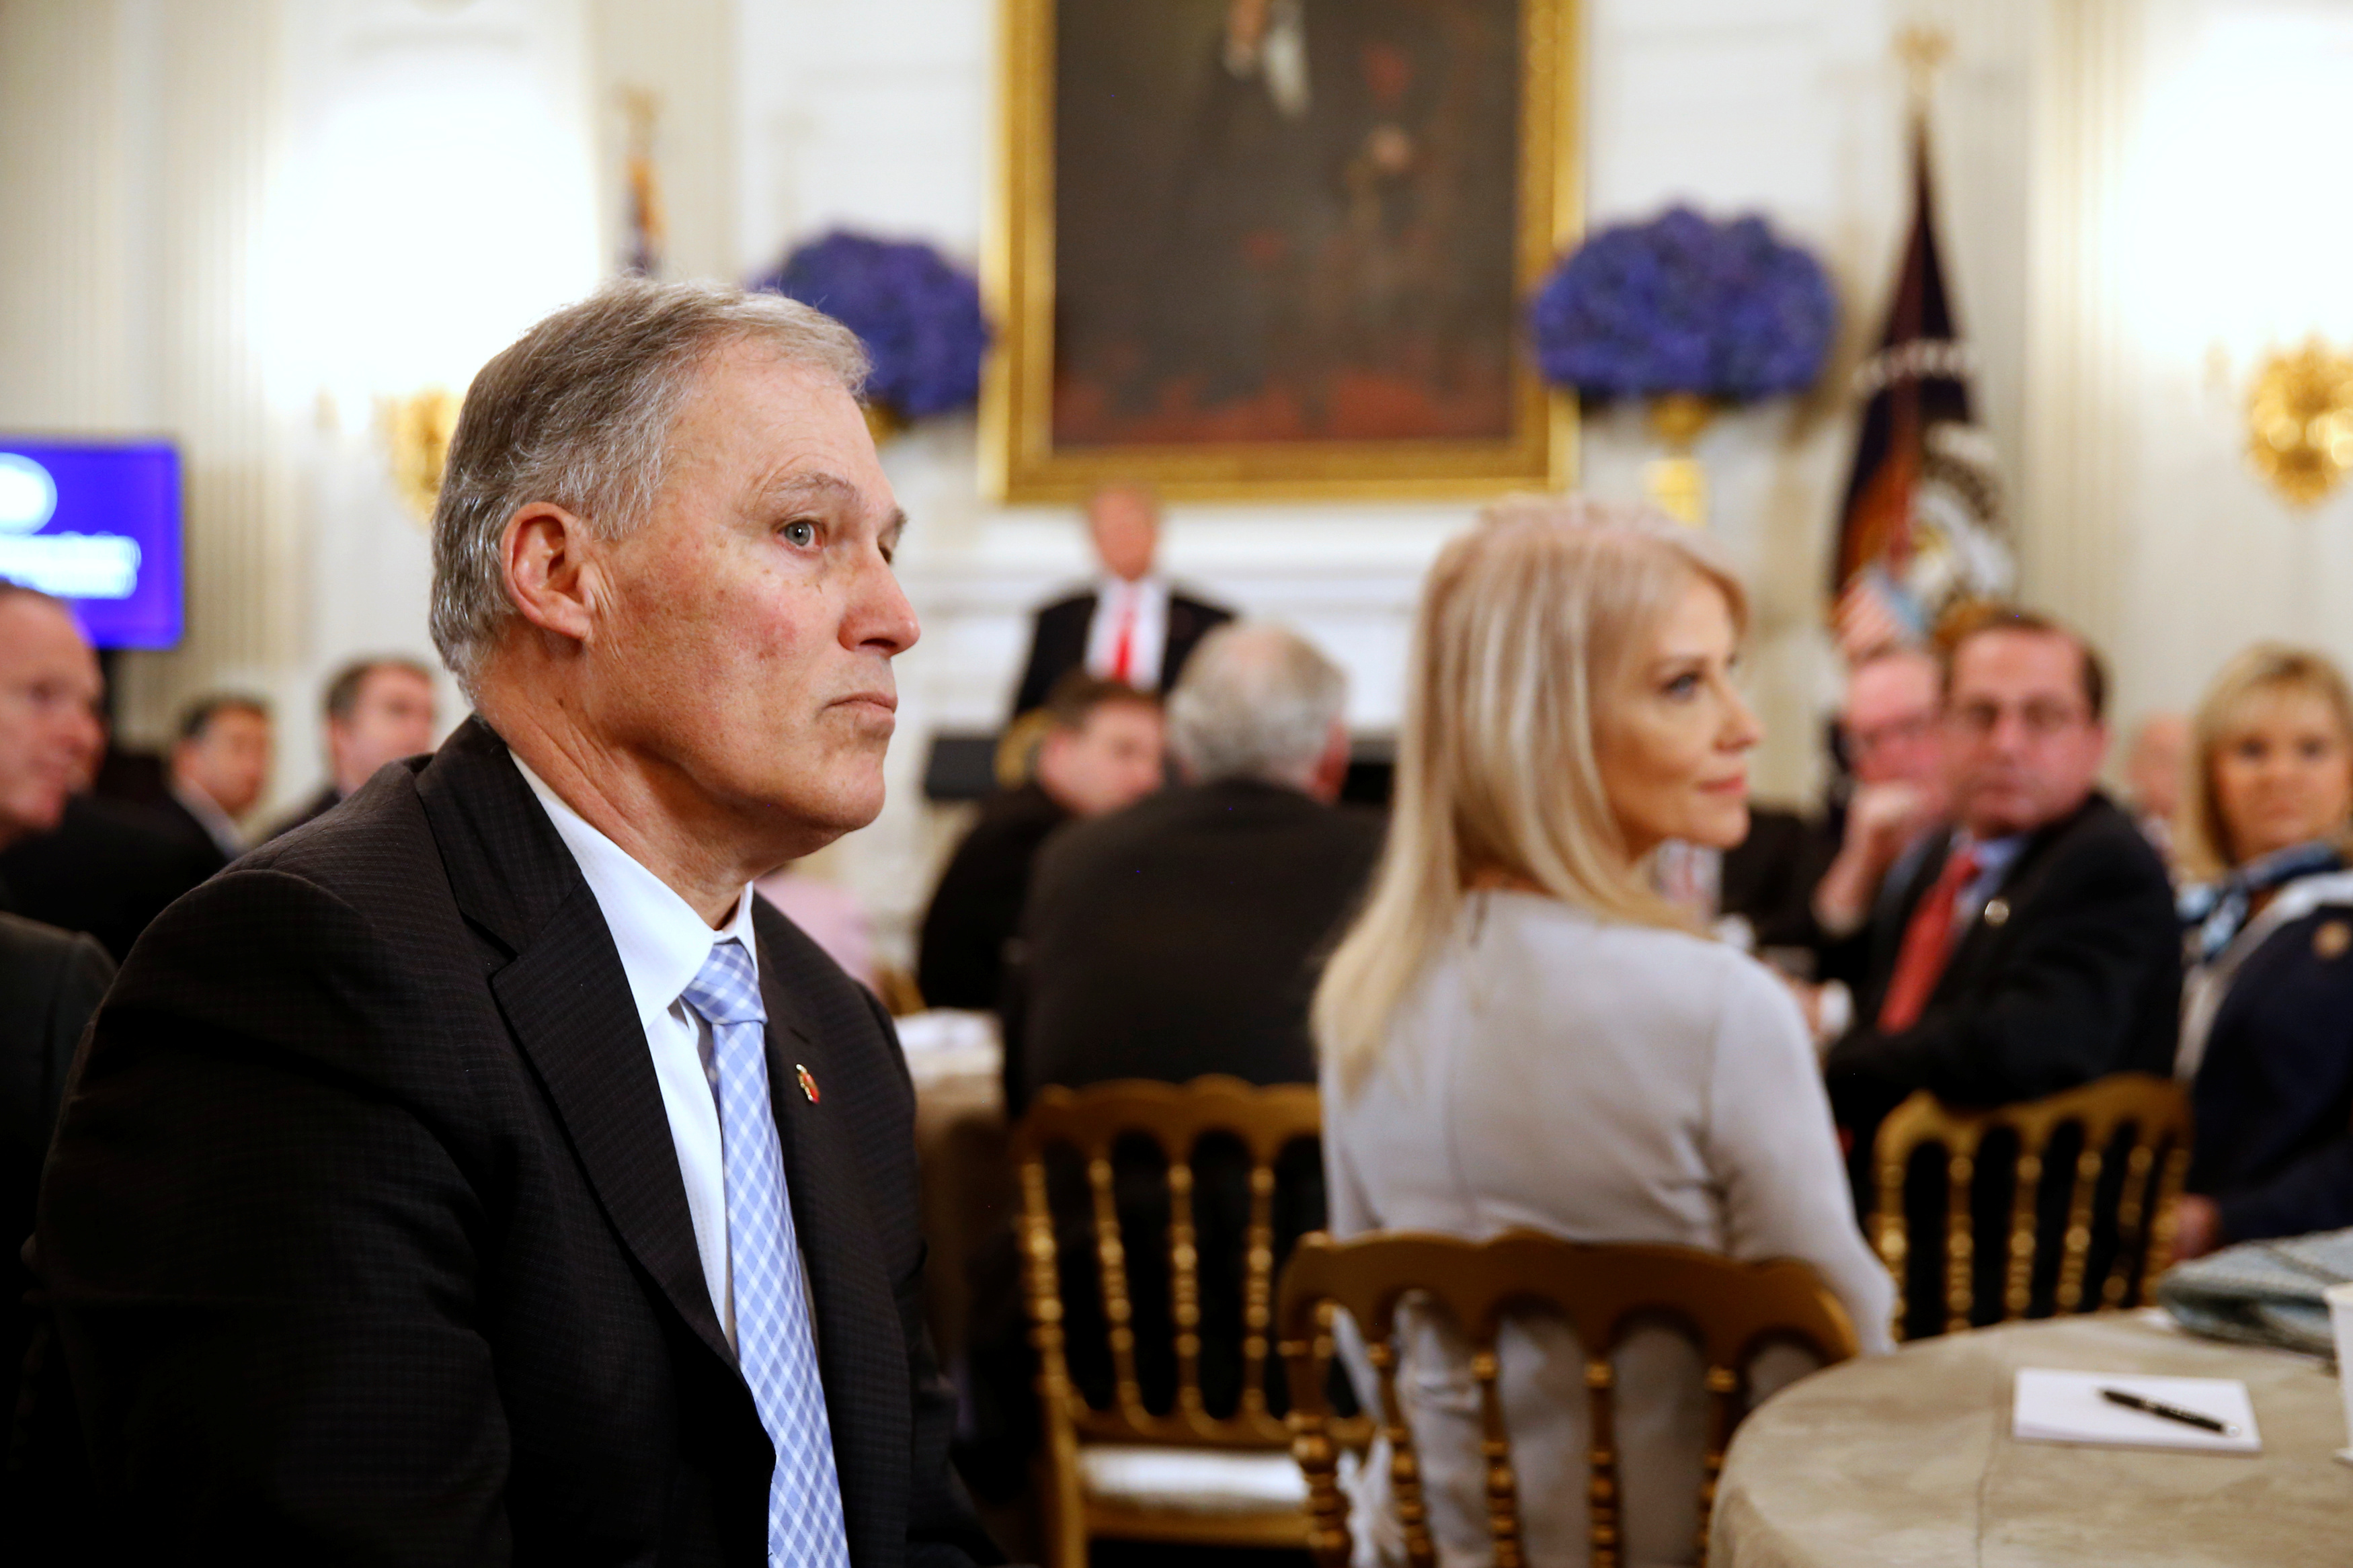 Trump holds a discussion about school shootings with state governors from around the country at the White House in Washington